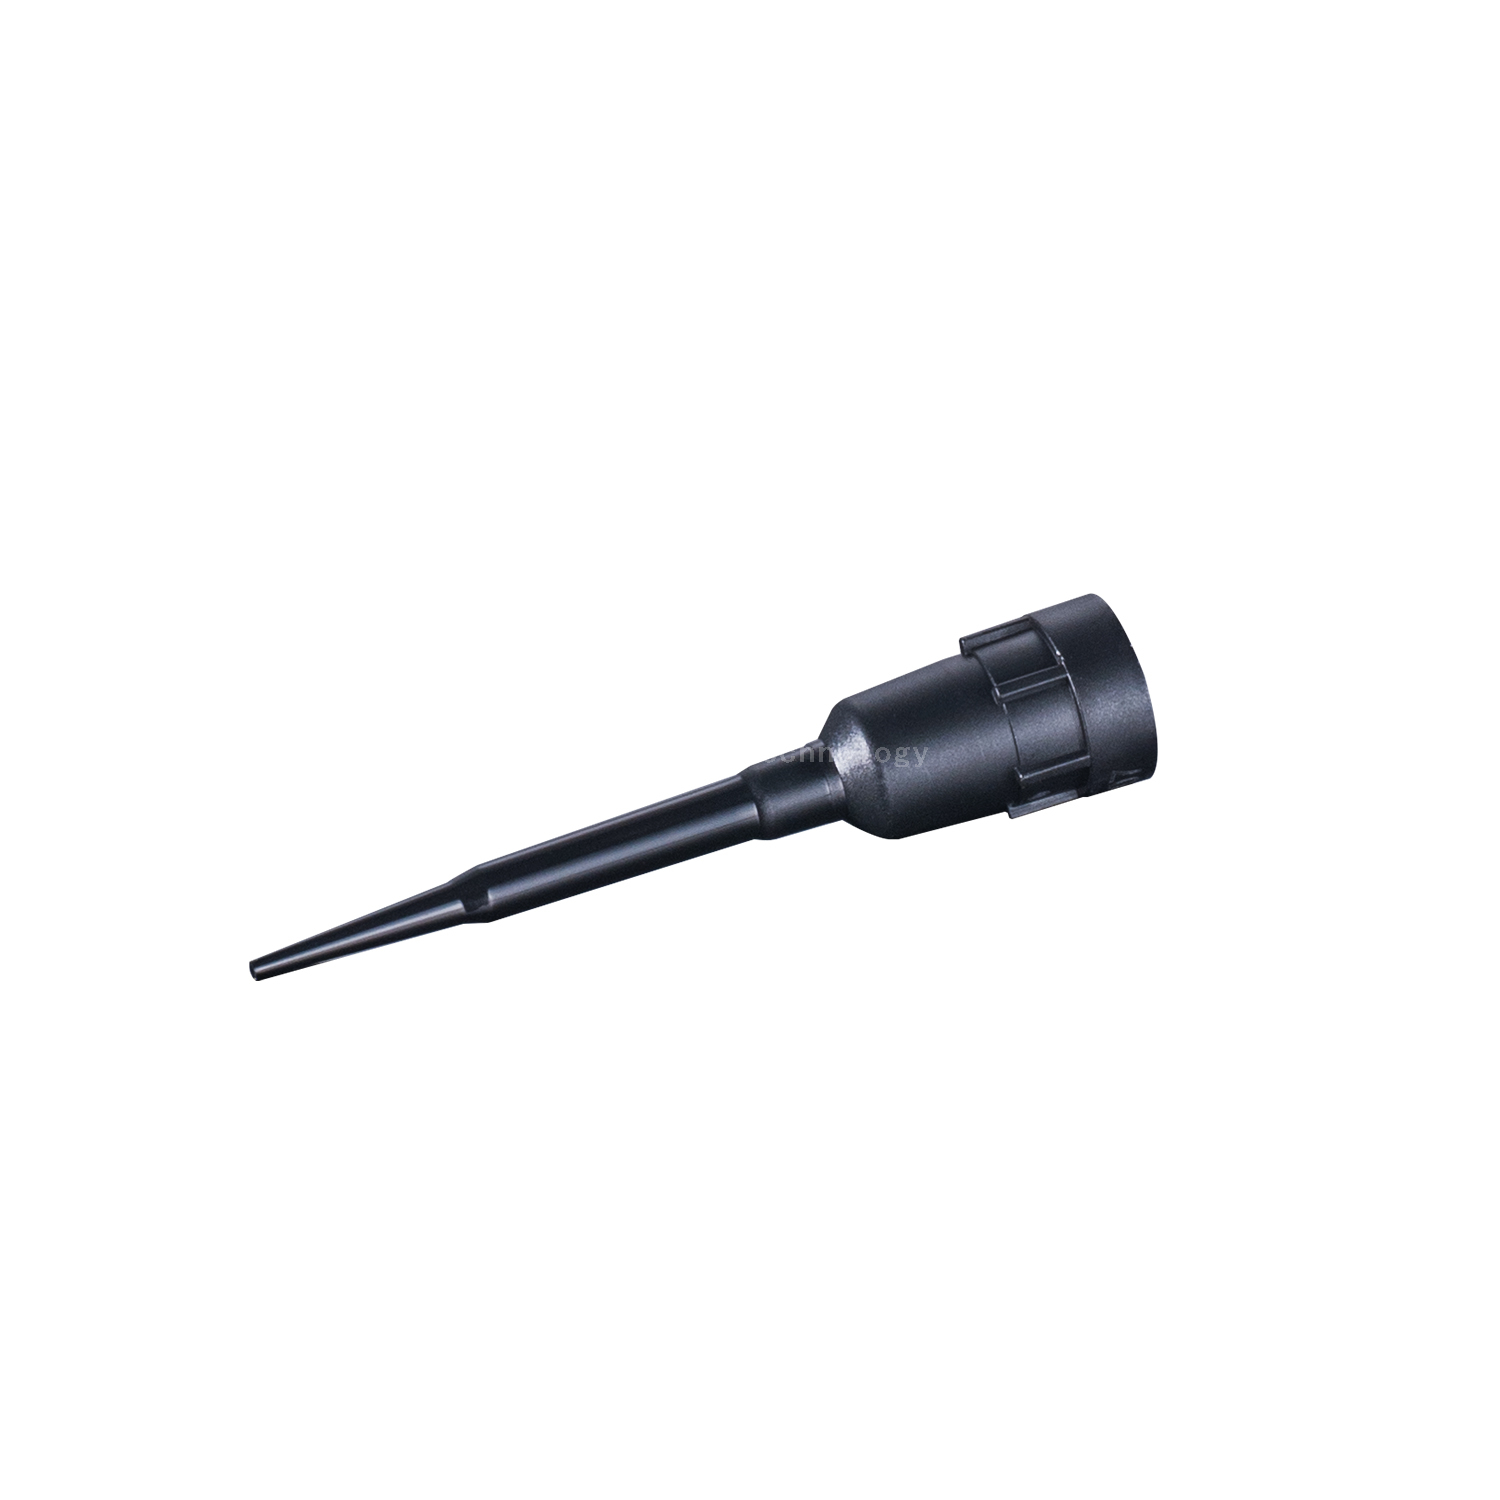 Tecan LiHa 20μL Conductive PP Pipette Tip (Racked,sterilized) for Liquid Transfer No Filter TT-20C-RSL Low Residual